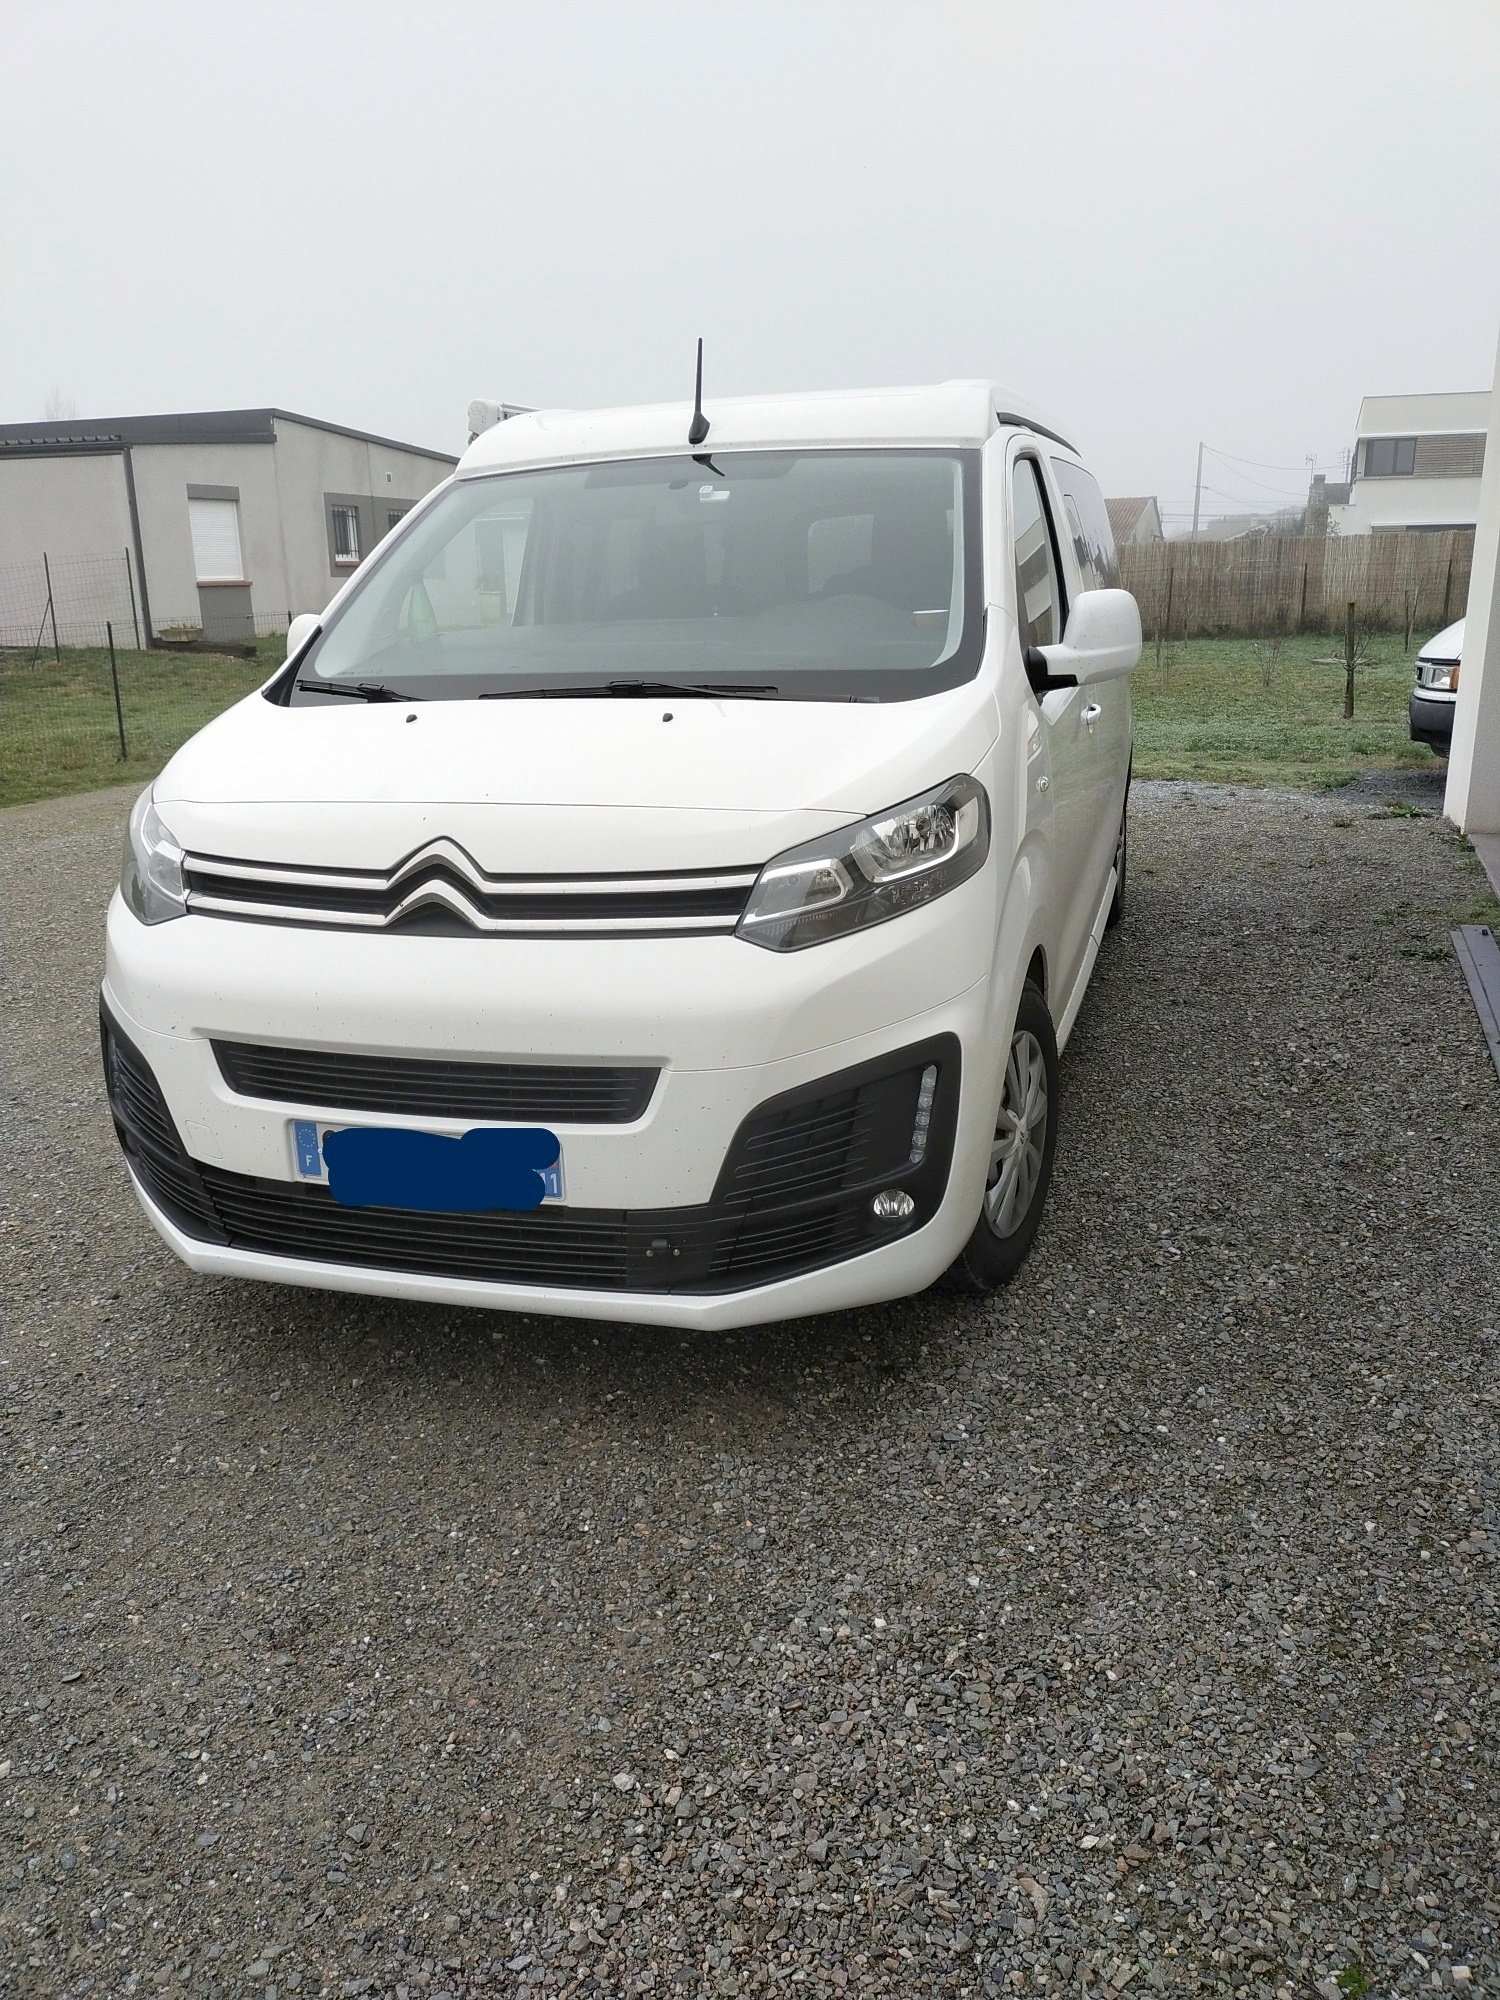 Picture of Citroën Jumpy